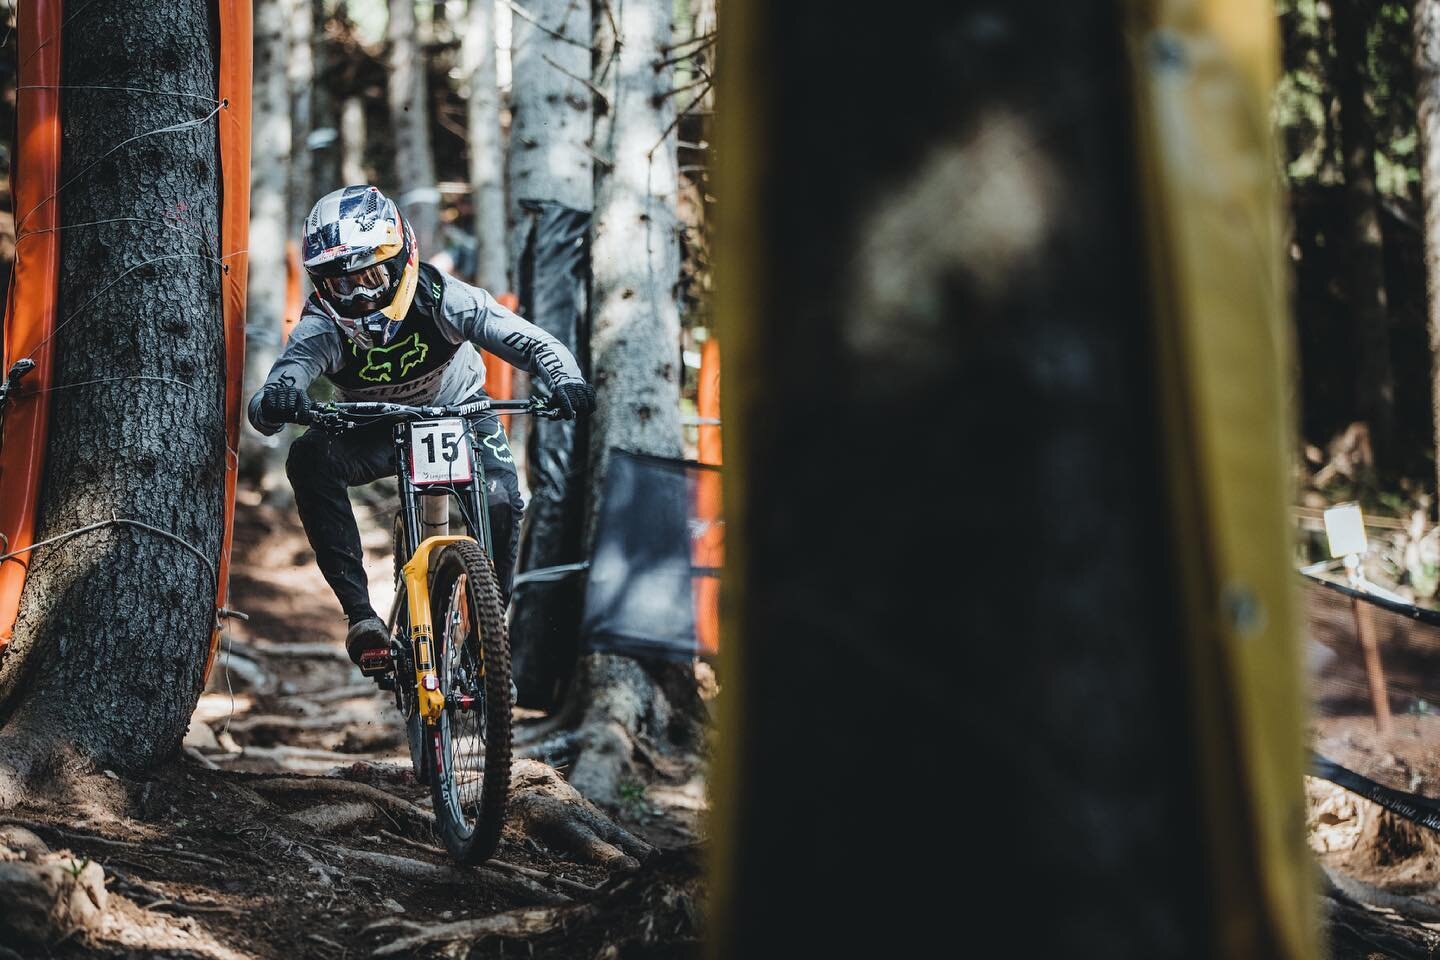 Threading the needle through the Swiss Forest // @finniles 

⁠
#dhmtb #downhillmtb #downhill #mountainbikes #ucidownhill #mtb #bike